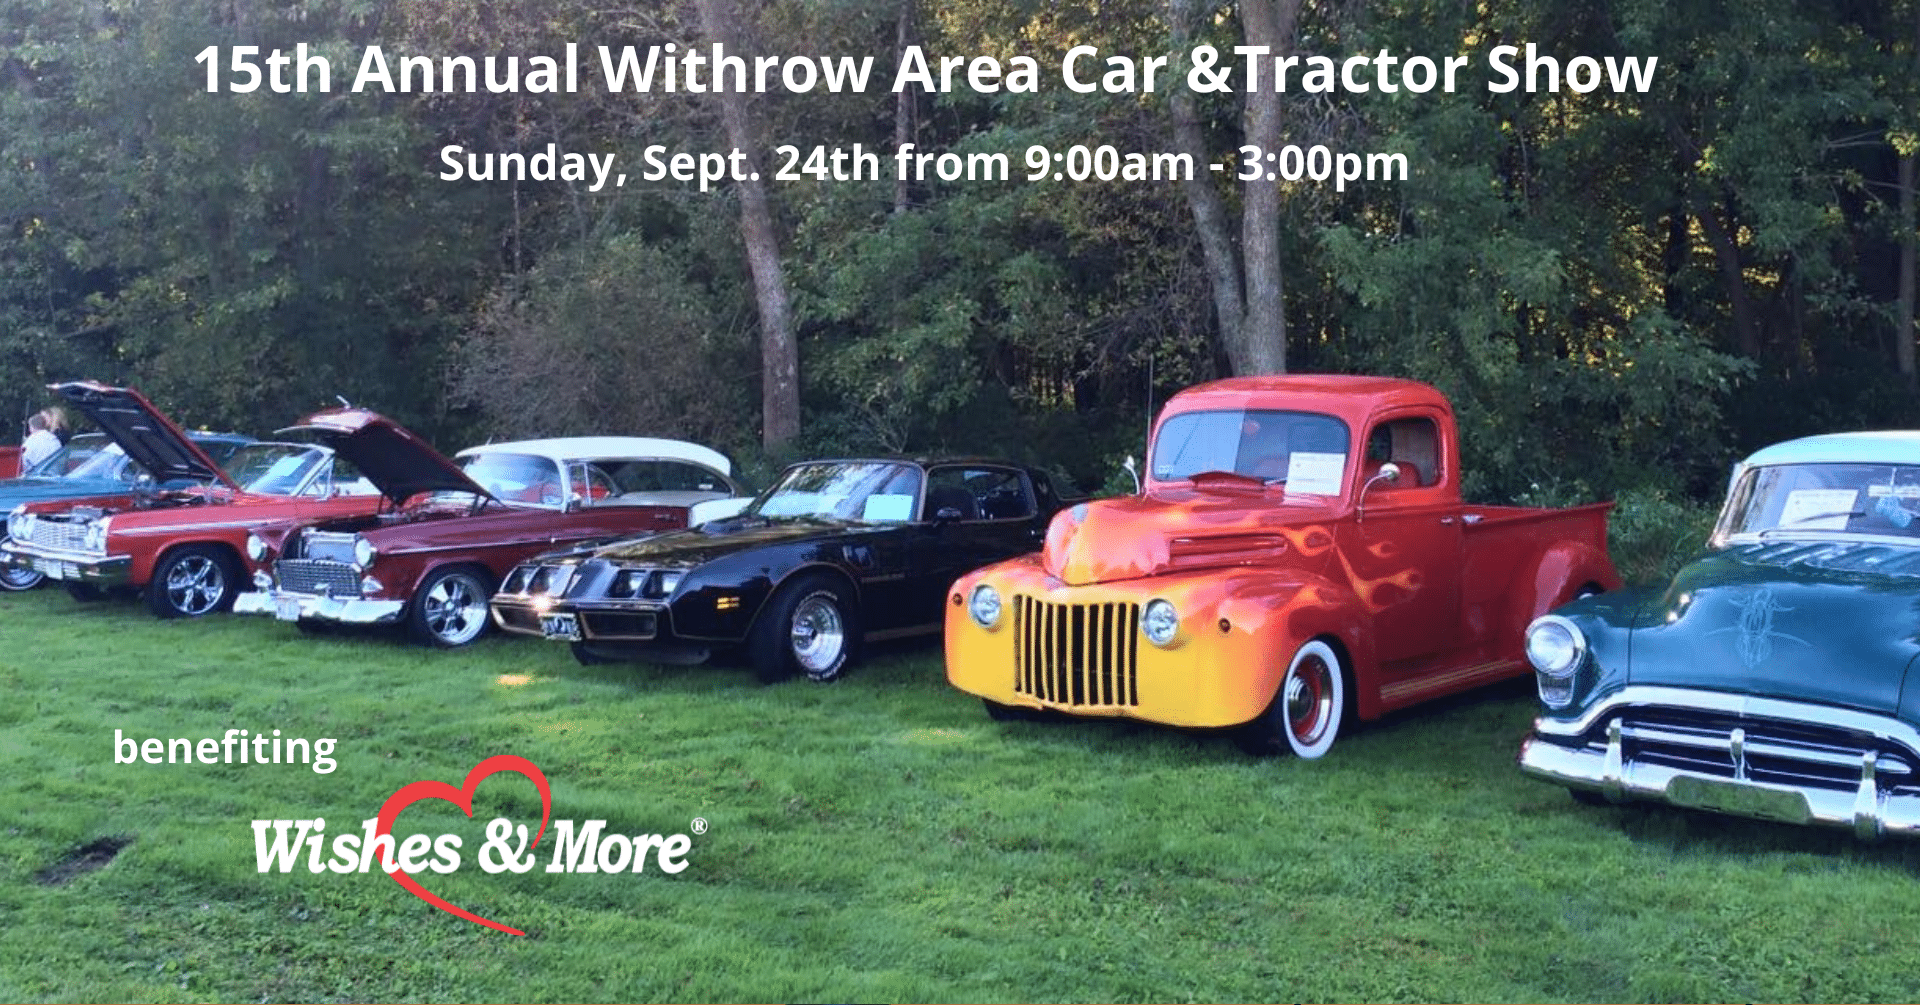 Withrow Car & Tractor Show Wishes & More®